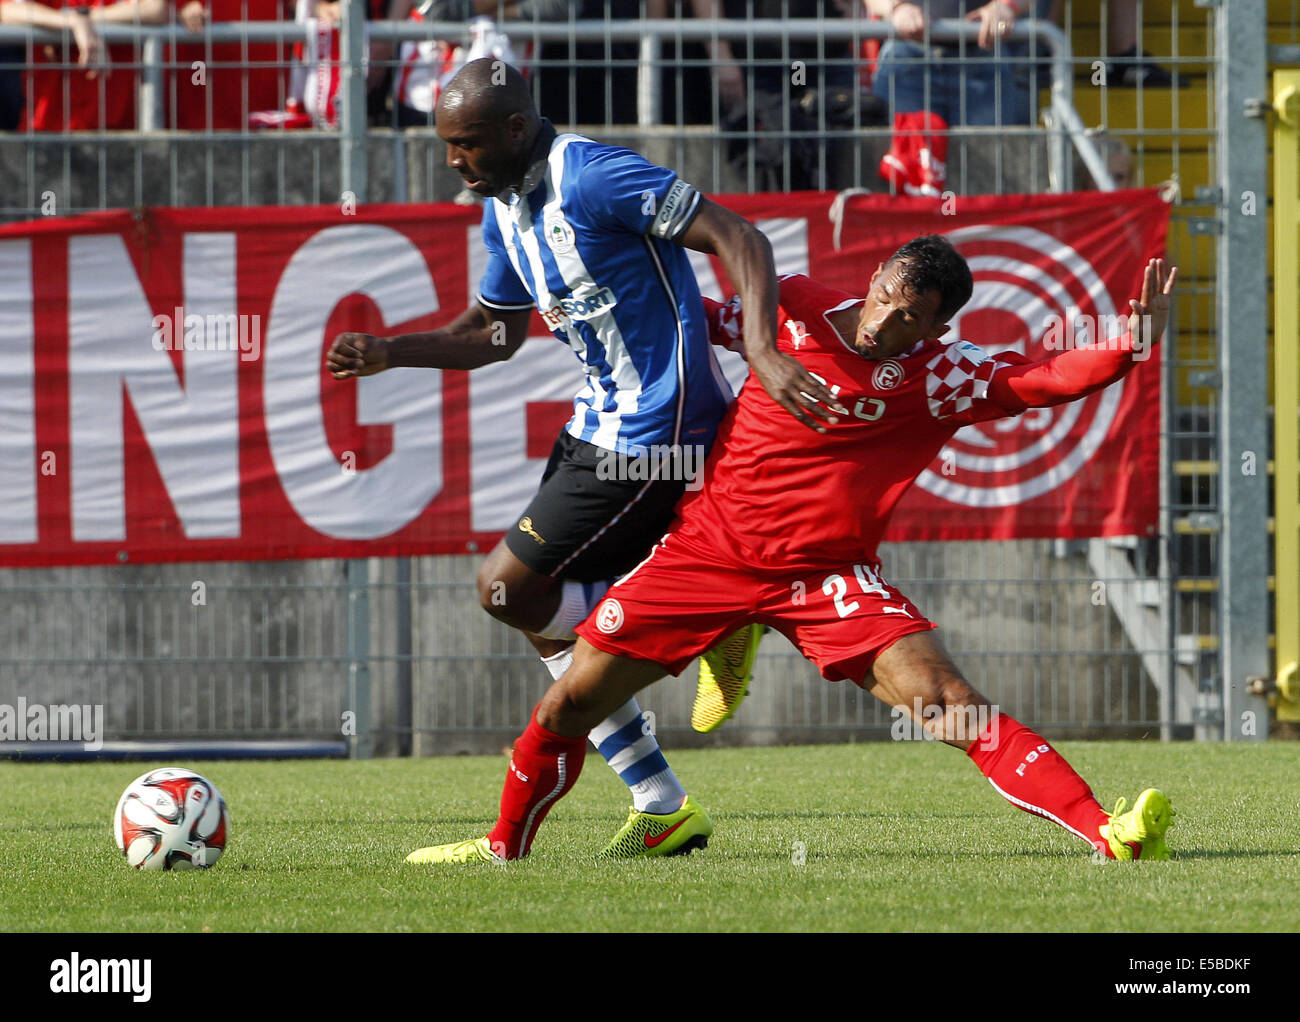 Duesseldorf's Sergio da Silva Pinto (R) vies for the ball with Wigan's Emmerson Boyce during the Fortuna Duesseldorf and Wigan Athletic in at Paul Janes Stadium in Duesseldorf, Germany, 26 July 2014. Photo: ROLAND WEIHRAUCH/dpa Stock Photo